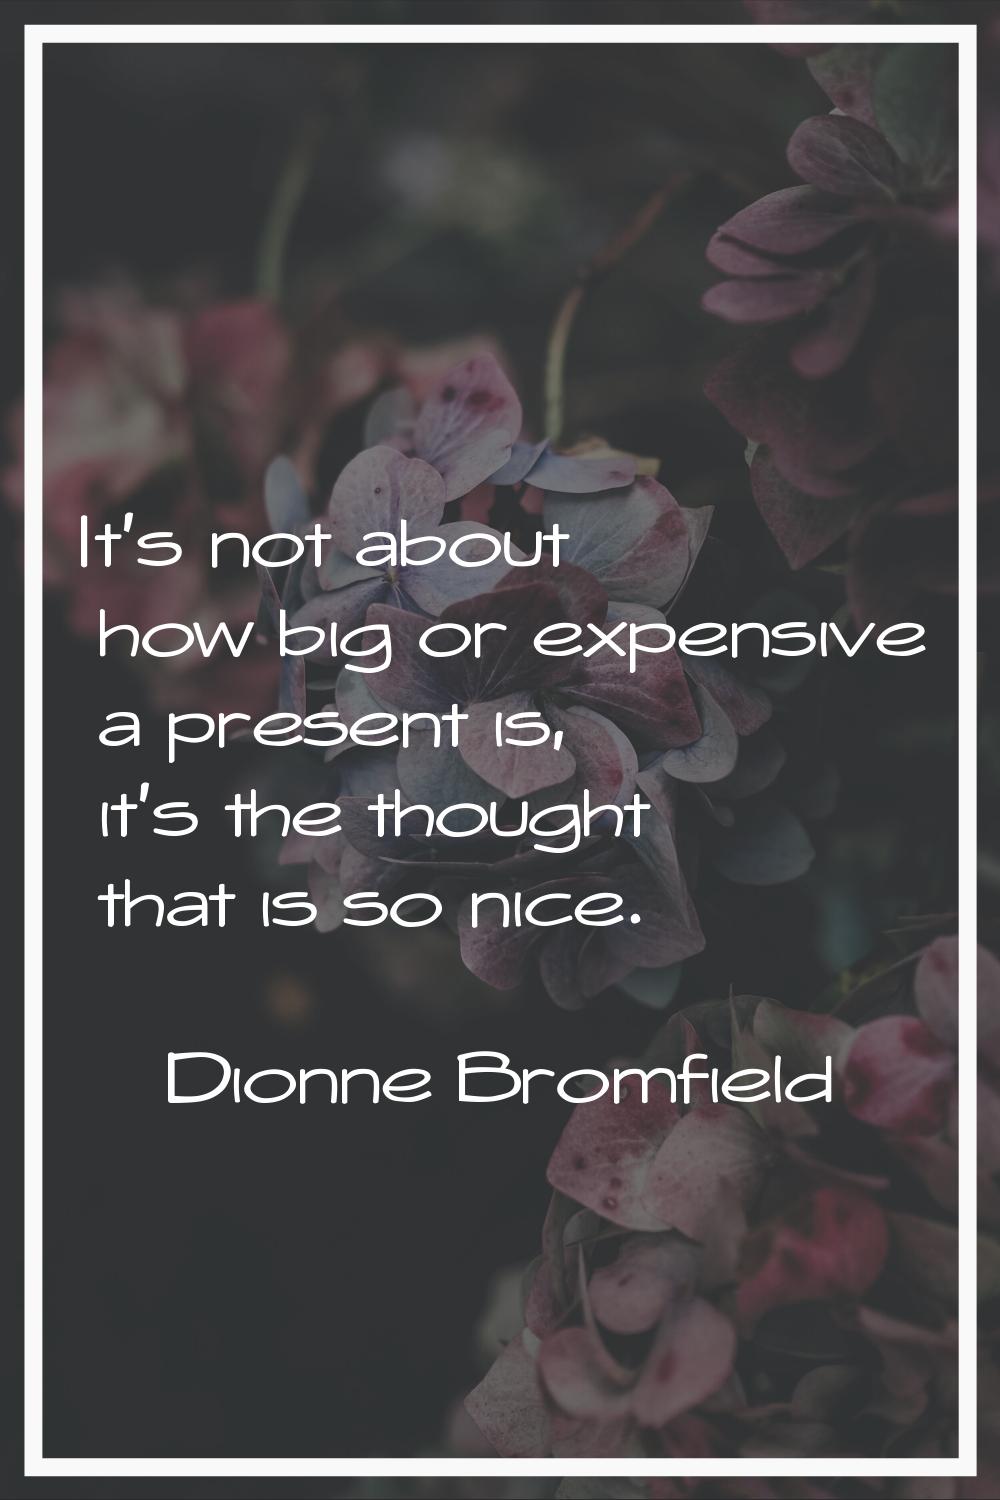 It's not about how big or expensive a present is, it's the thought that is so nice.